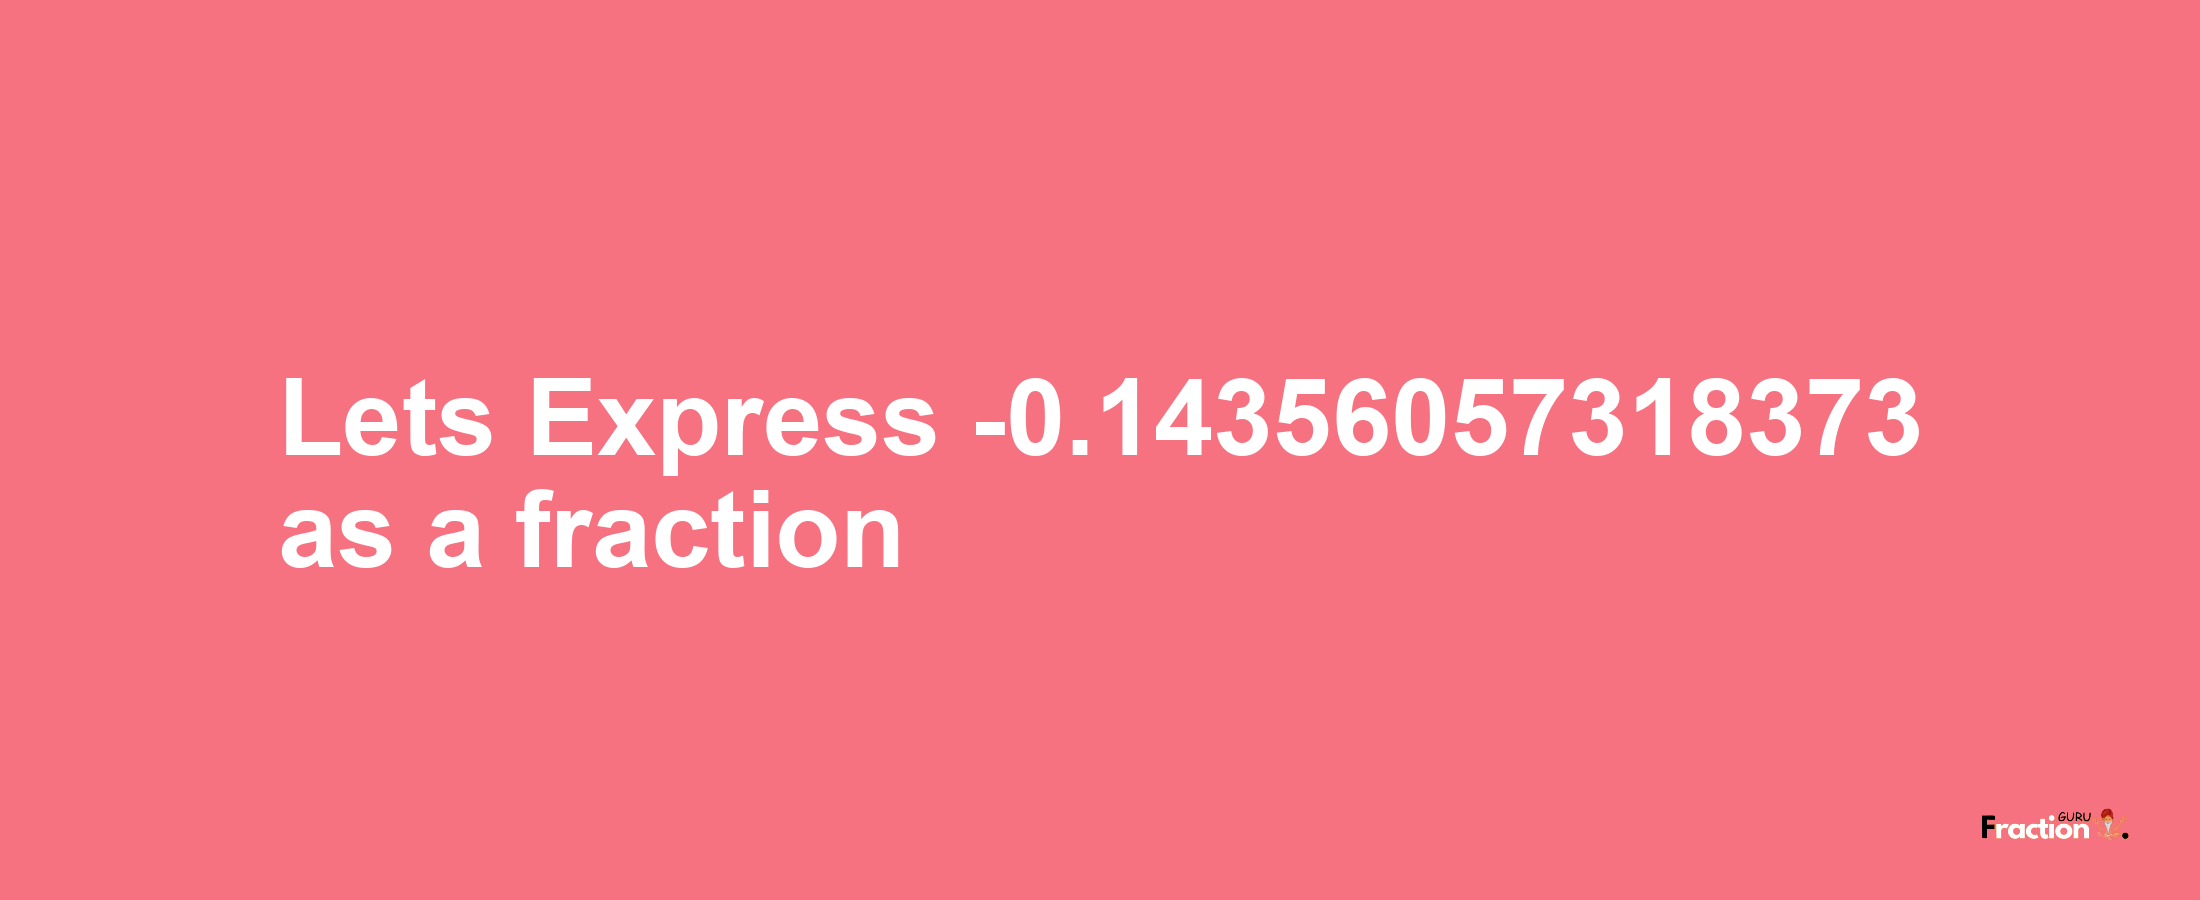 Lets Express -0.14356057318373 as afraction